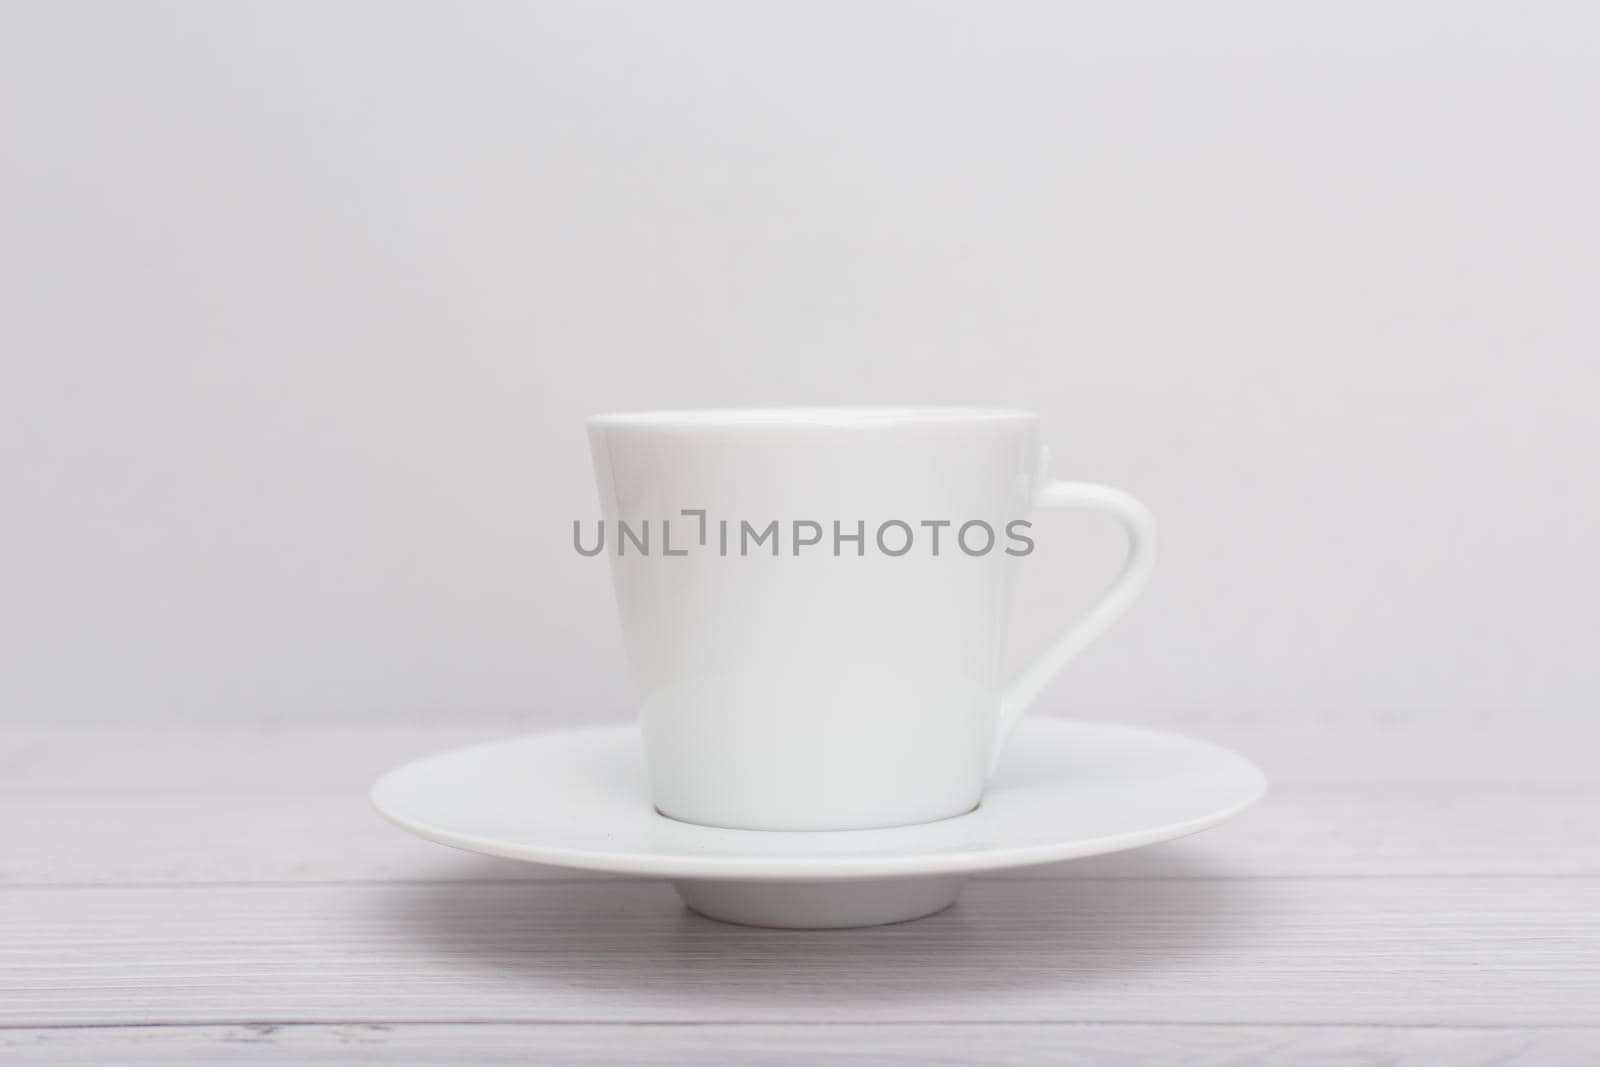 Selective focus, white tea or coffee cup on wooden table against white blurry background by Senorina_Irina